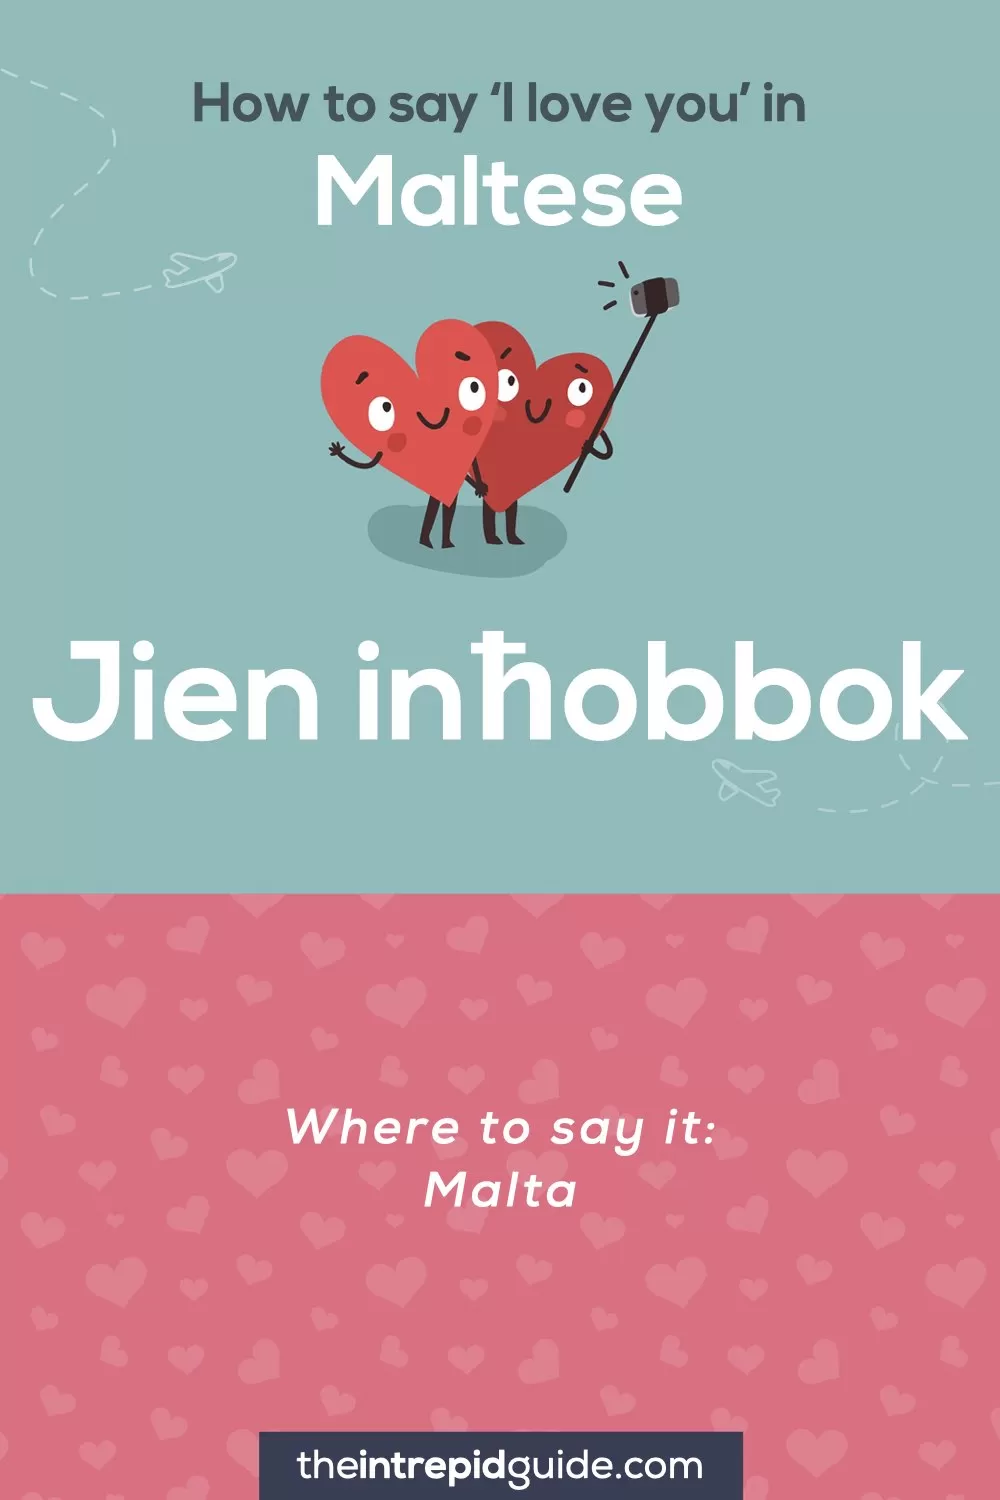 How to say I love you in different languages - Maltese - Jien inħobbok